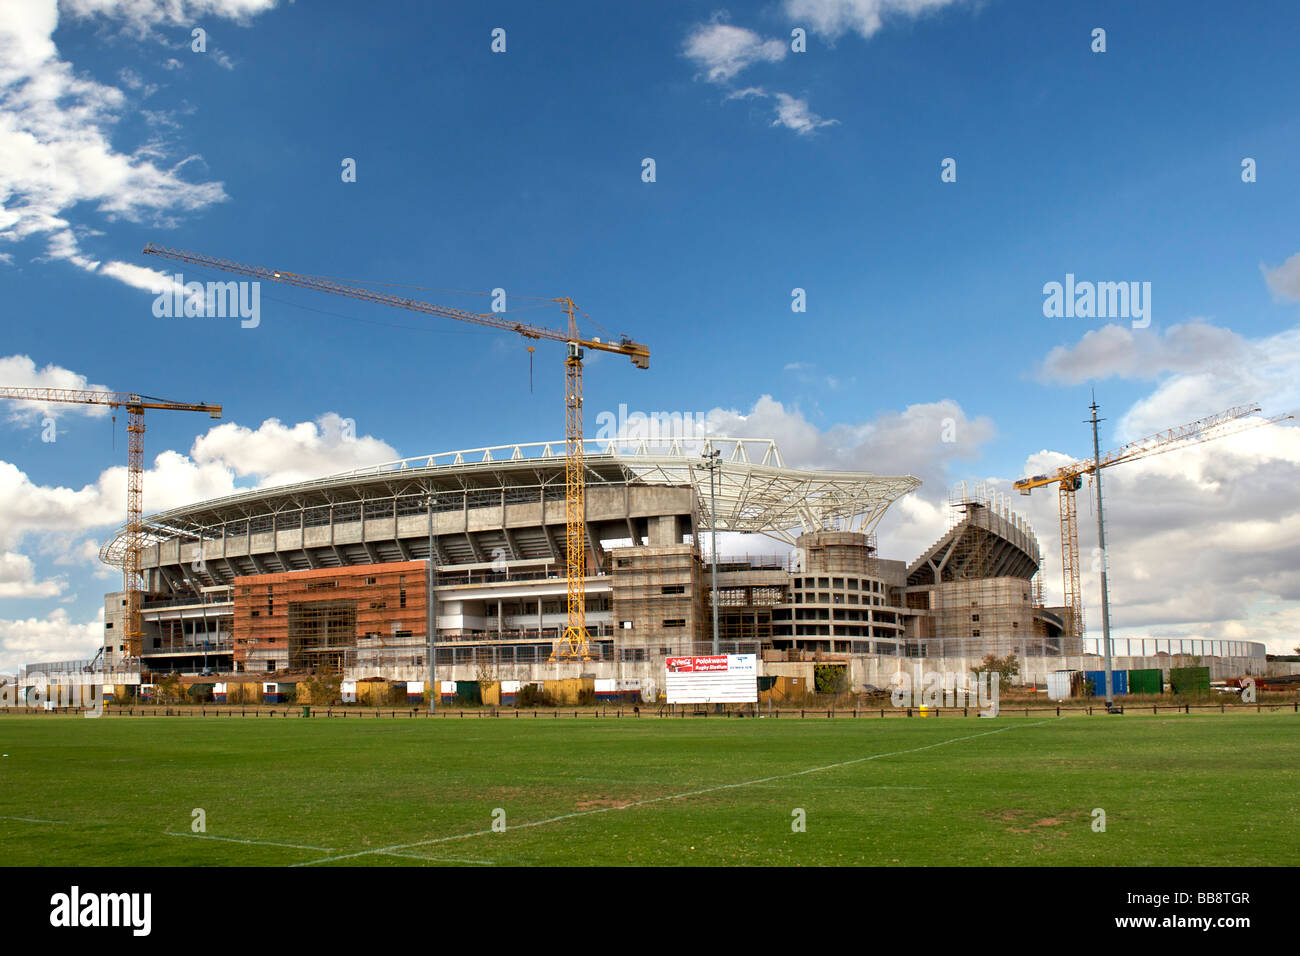 The Peter Mokaba FIFA 2010 world cup soccer stadium under construction in Polokwane, Limpopo Province, South Africa. Stock Photo